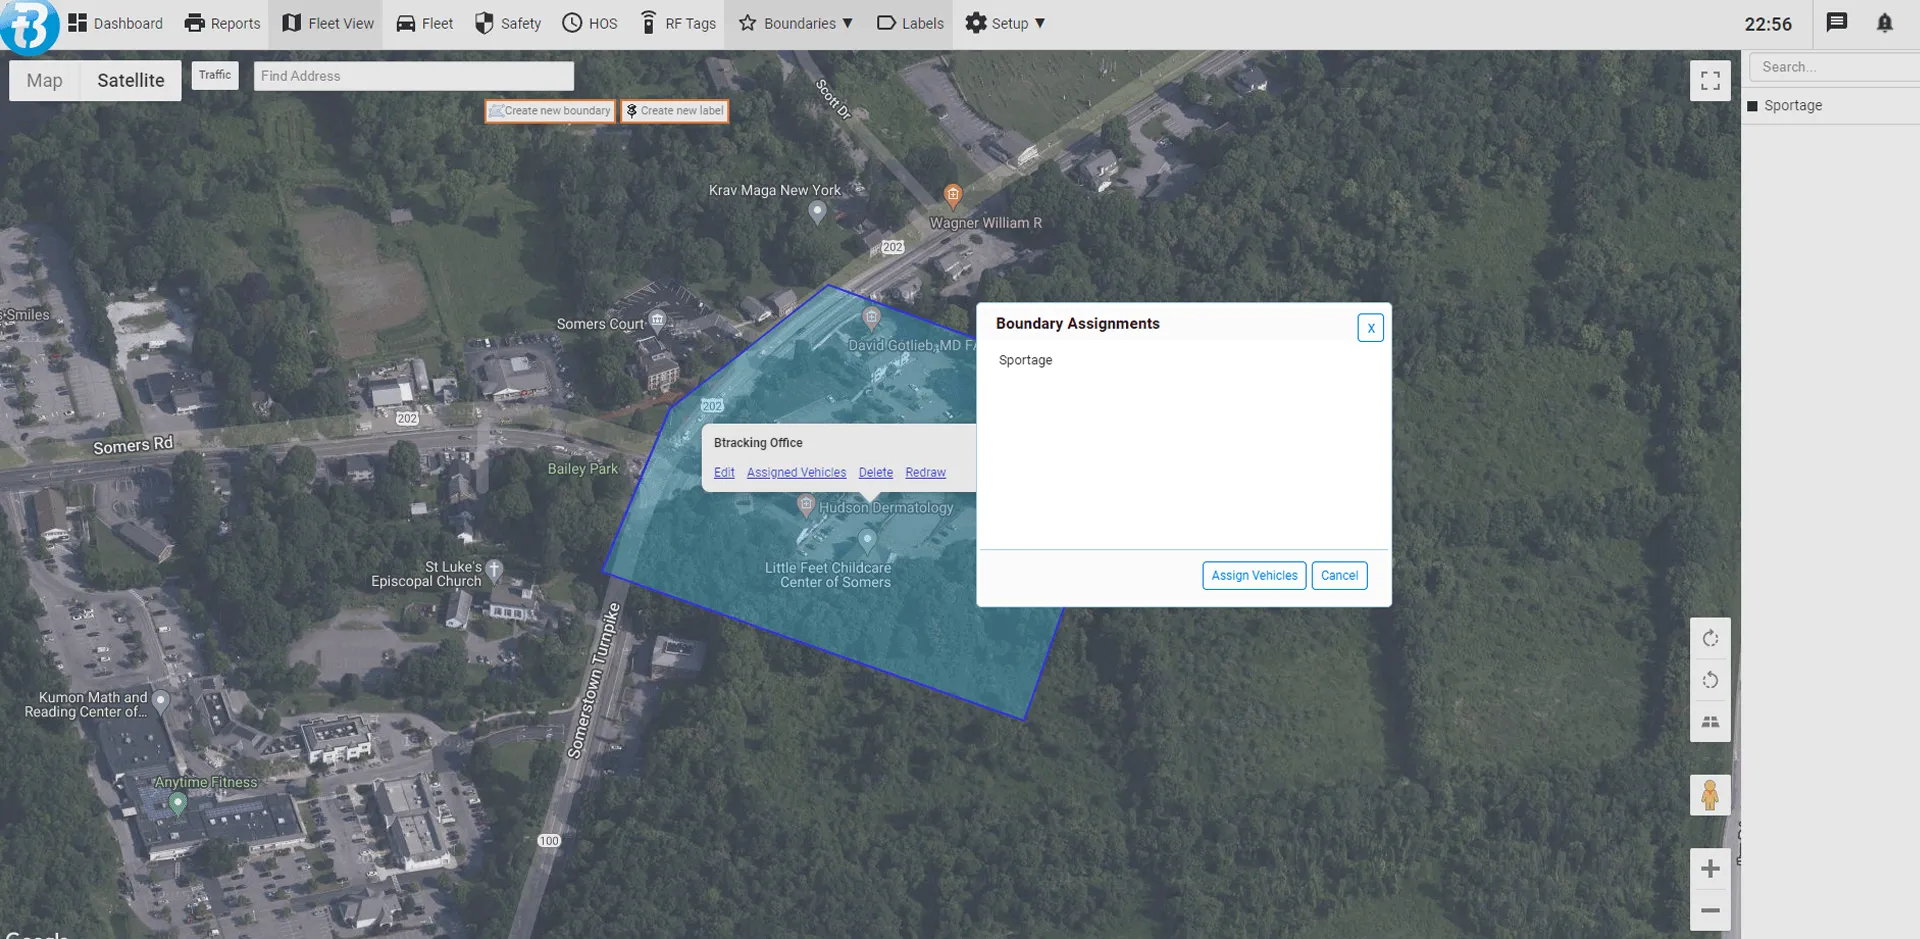 Btracking, Protect Against Theft with Geofences around yards, warehouses, and lots